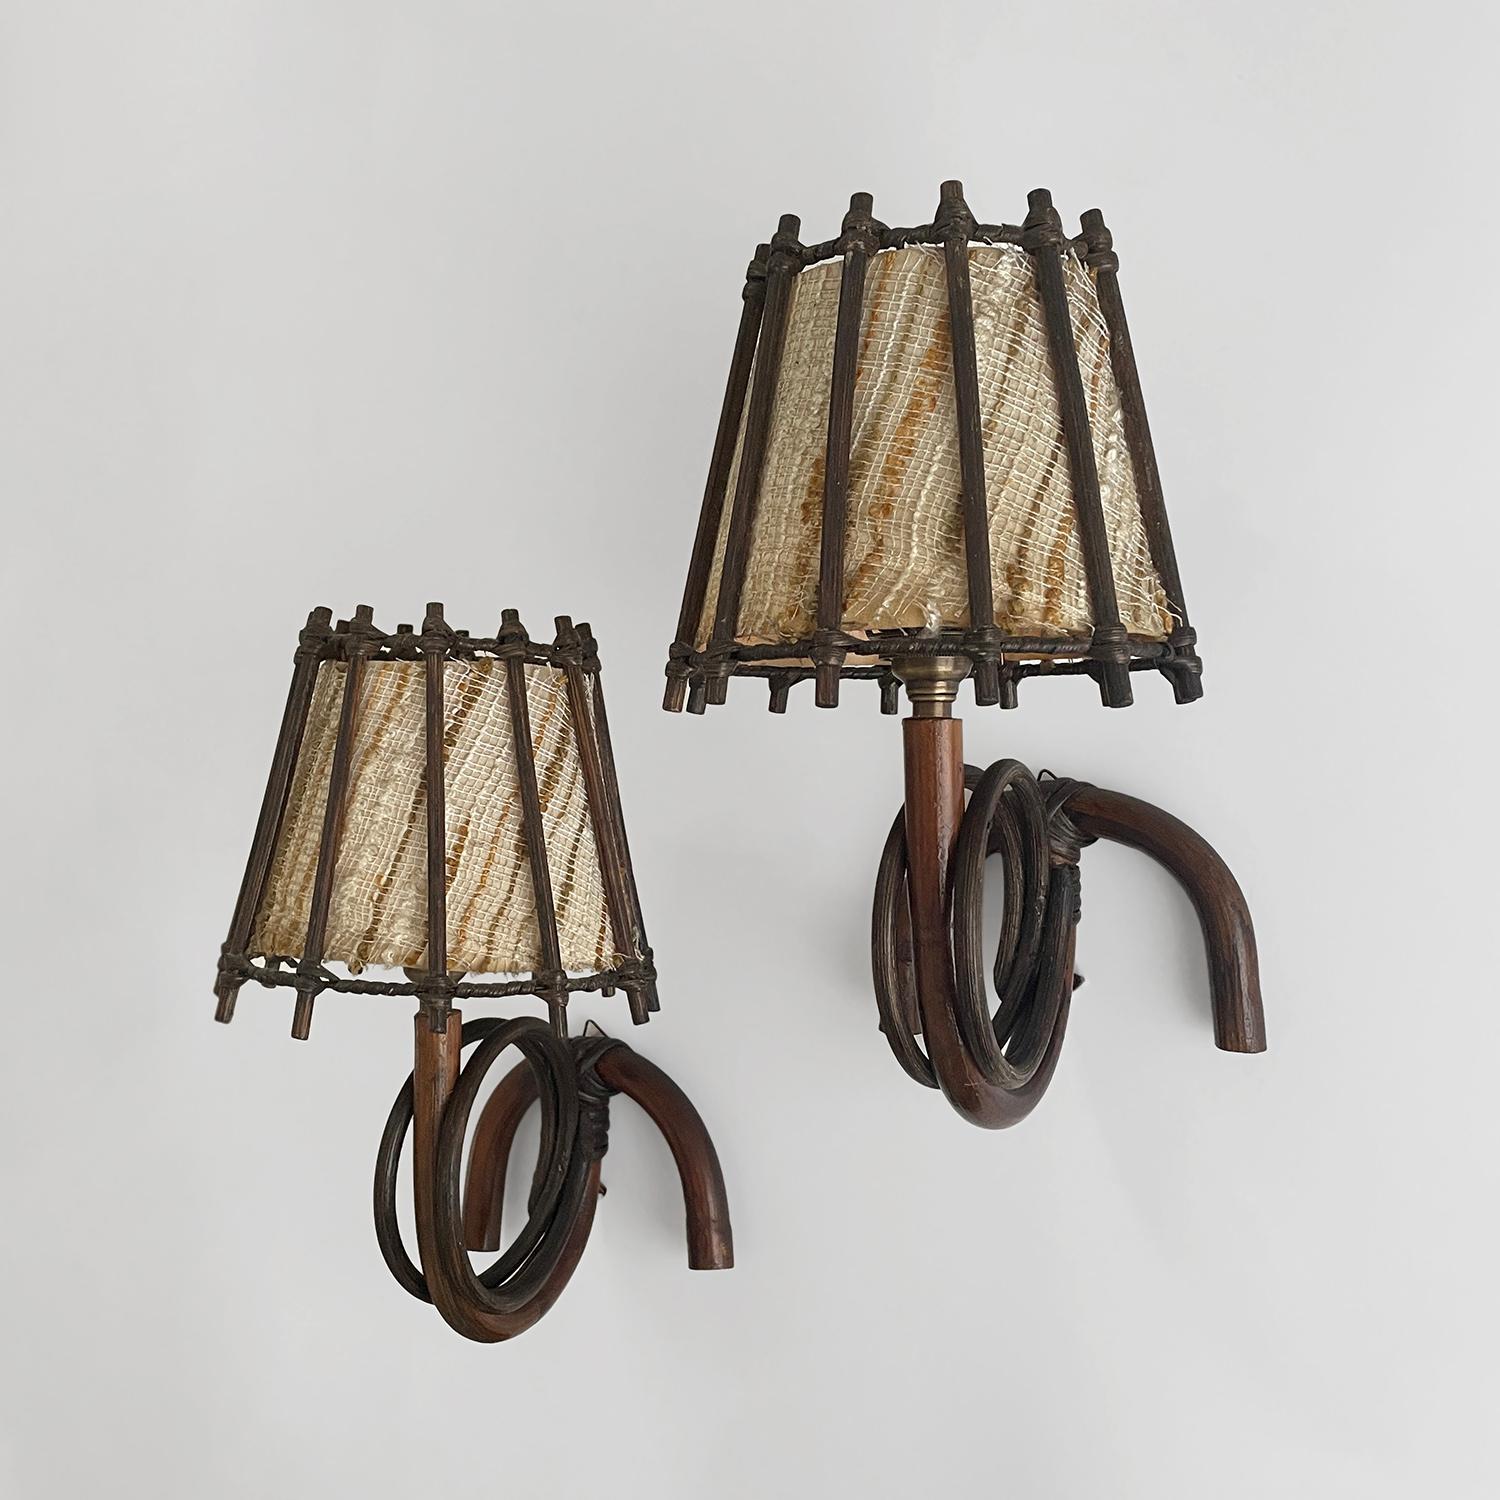 Pair of Louis Sognot bamboo & rattan sconces
France, circa 1960s
Each lamp is unique in its organic composition and feel 
Sculpted bamboo wall mounted backpiece is accented with looped rattan details and has a single mounting loop
Ascending arm